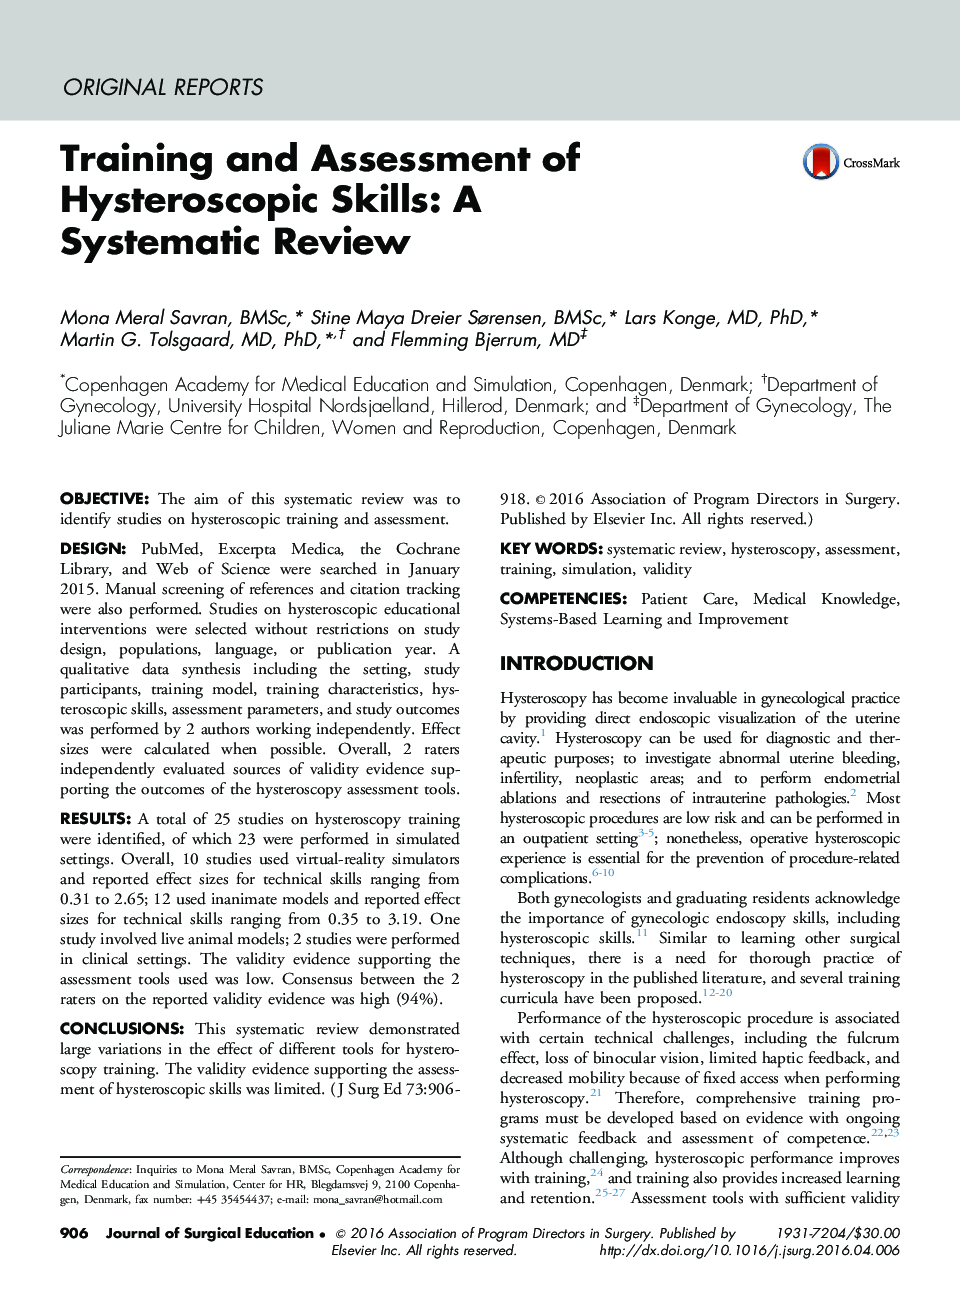 Training and Assessment of Hysteroscopic Skills: A Systematic Review